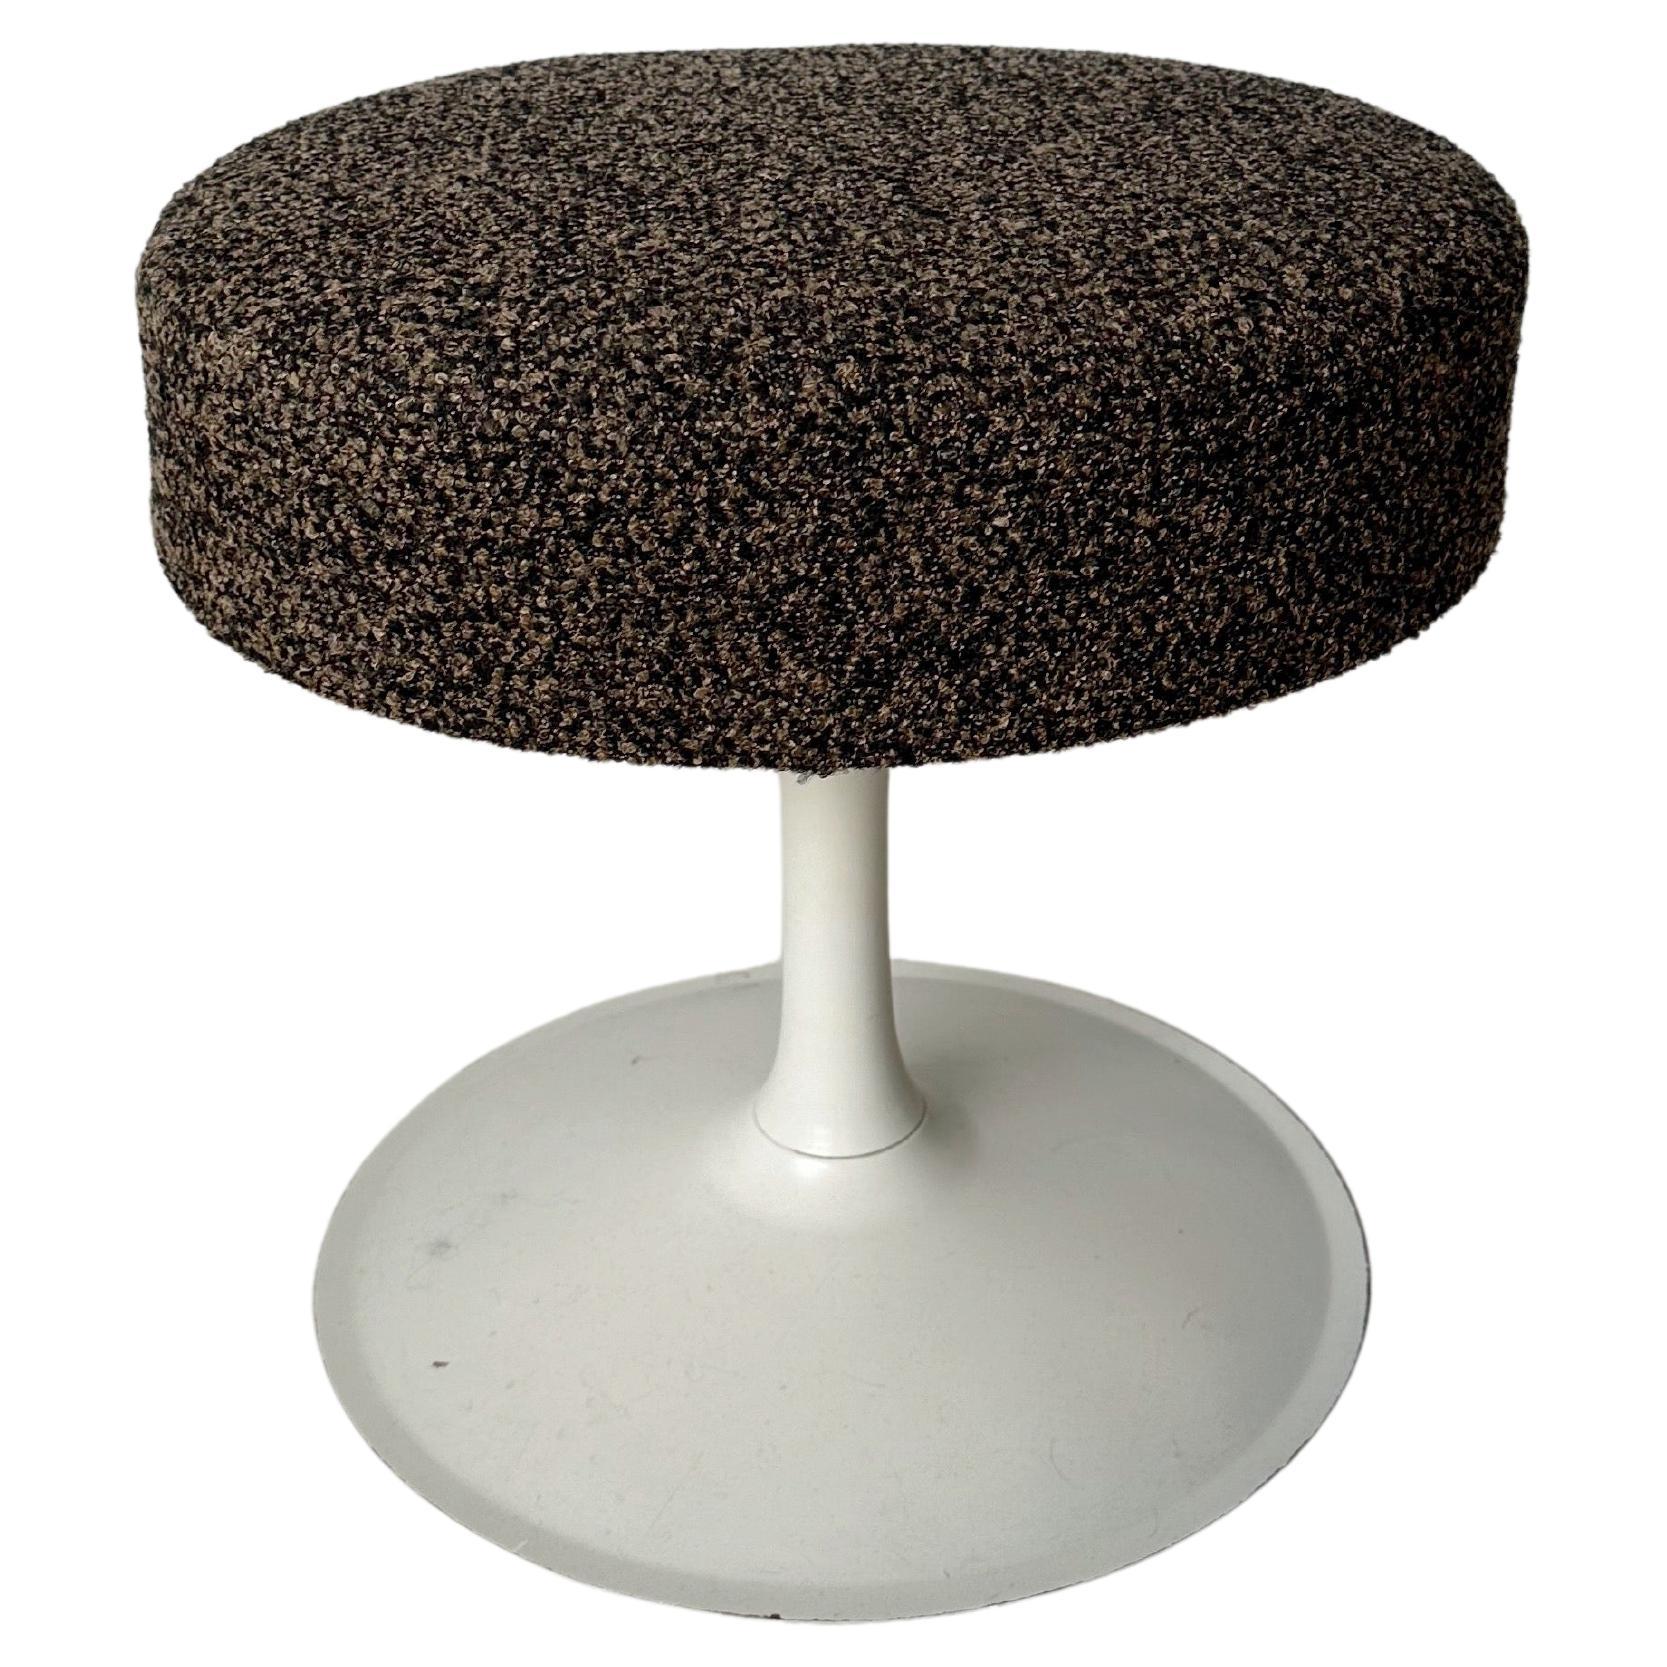 Space Age Tulip Chair / Stool with New Black & Brown Boucle Upholstery